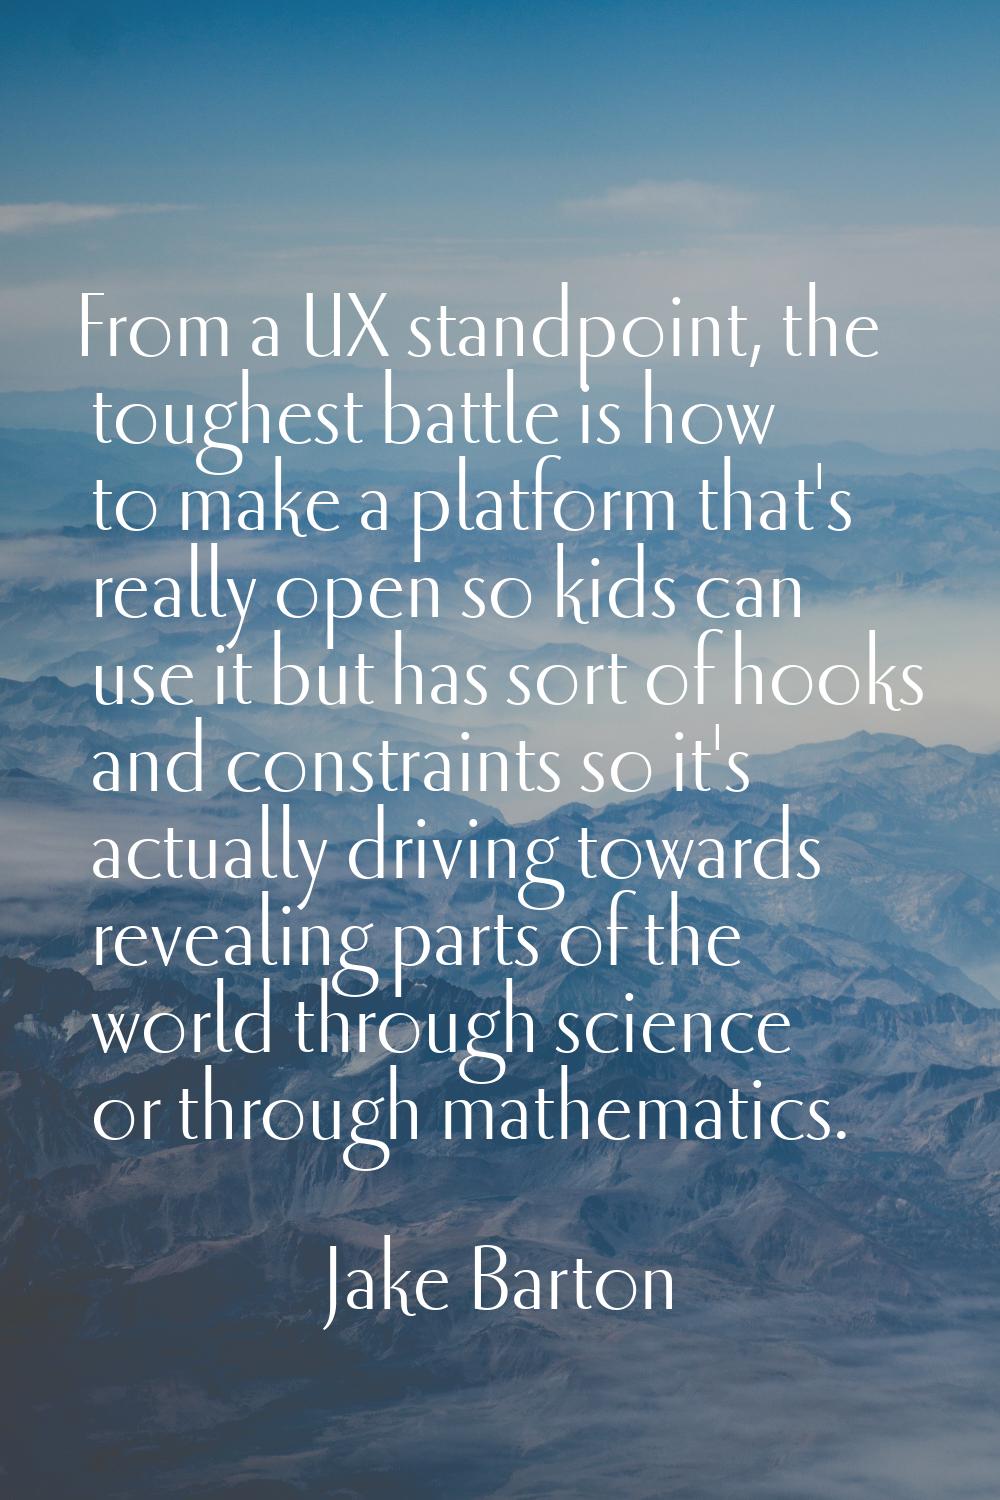 From a UX standpoint, the toughest battle is how to make a platform that's really open so kids can 